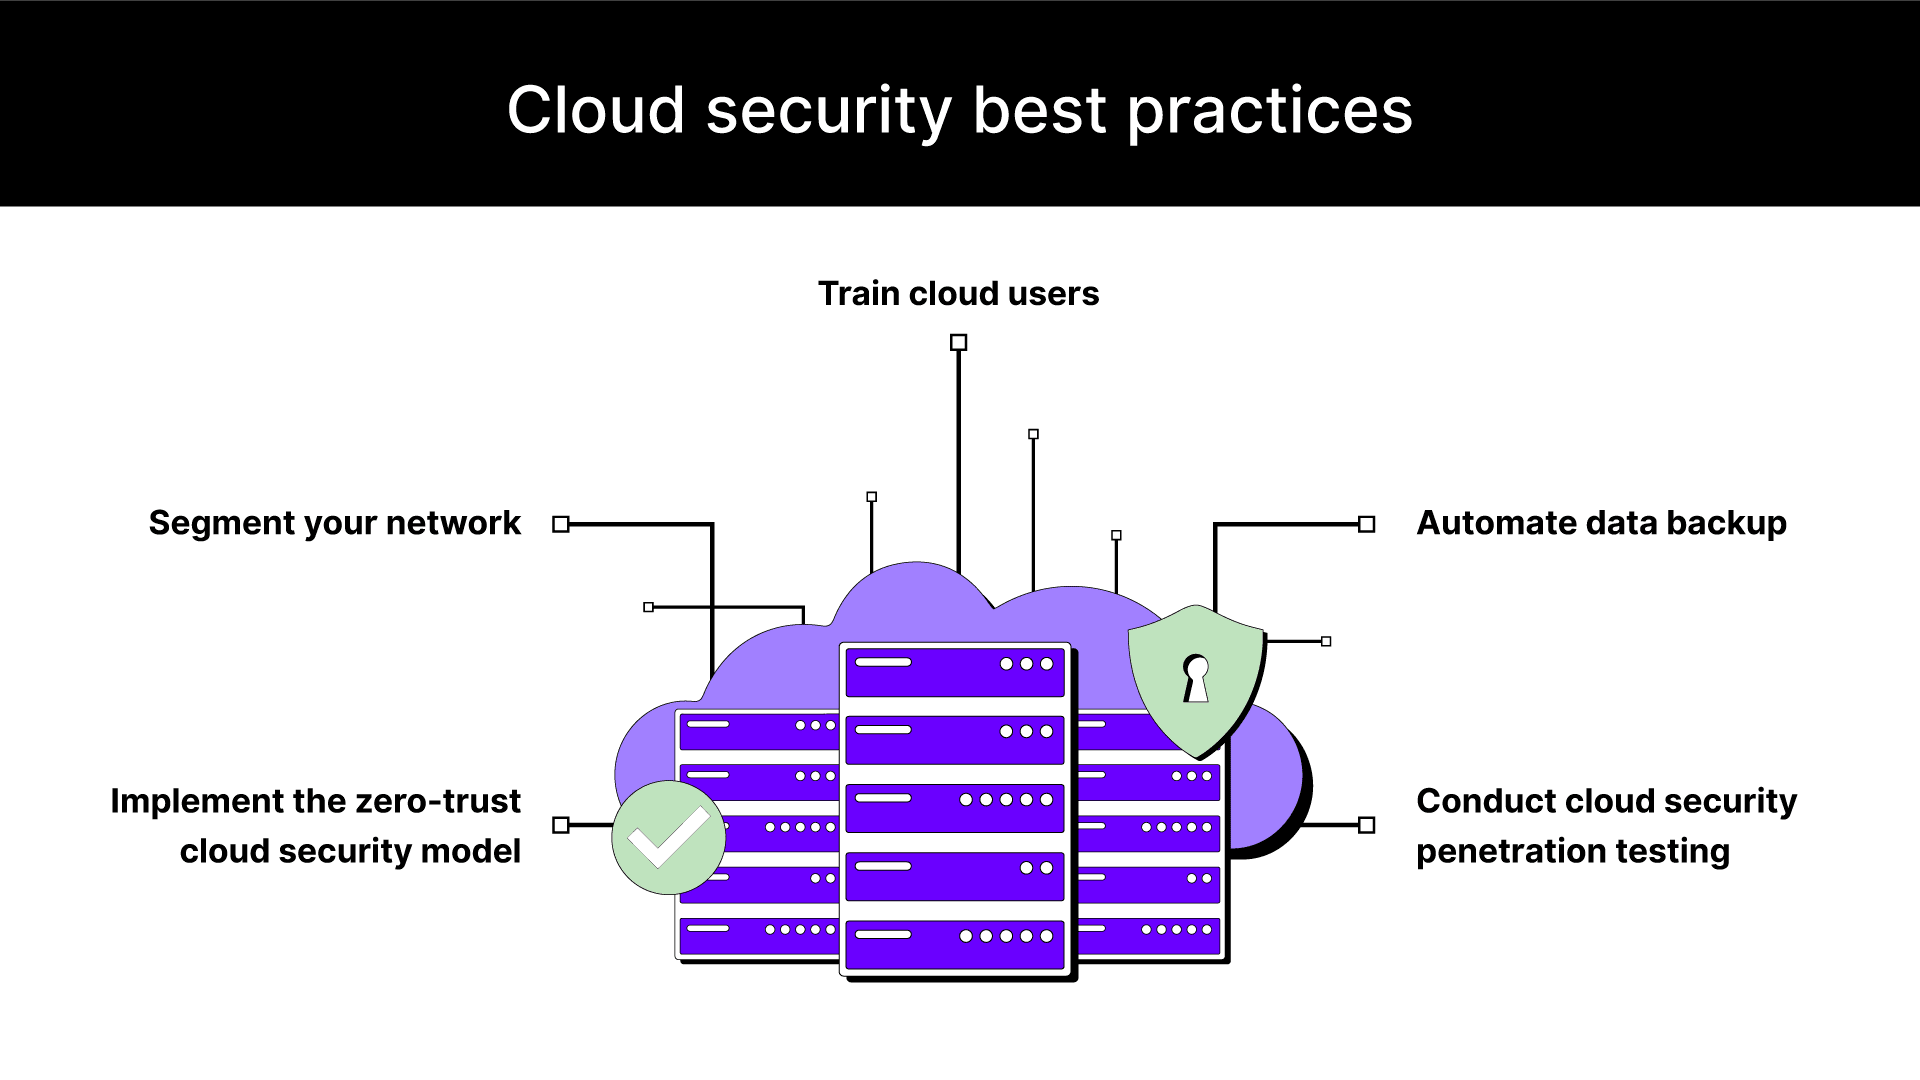 Best practices for securing cloud computing environments.